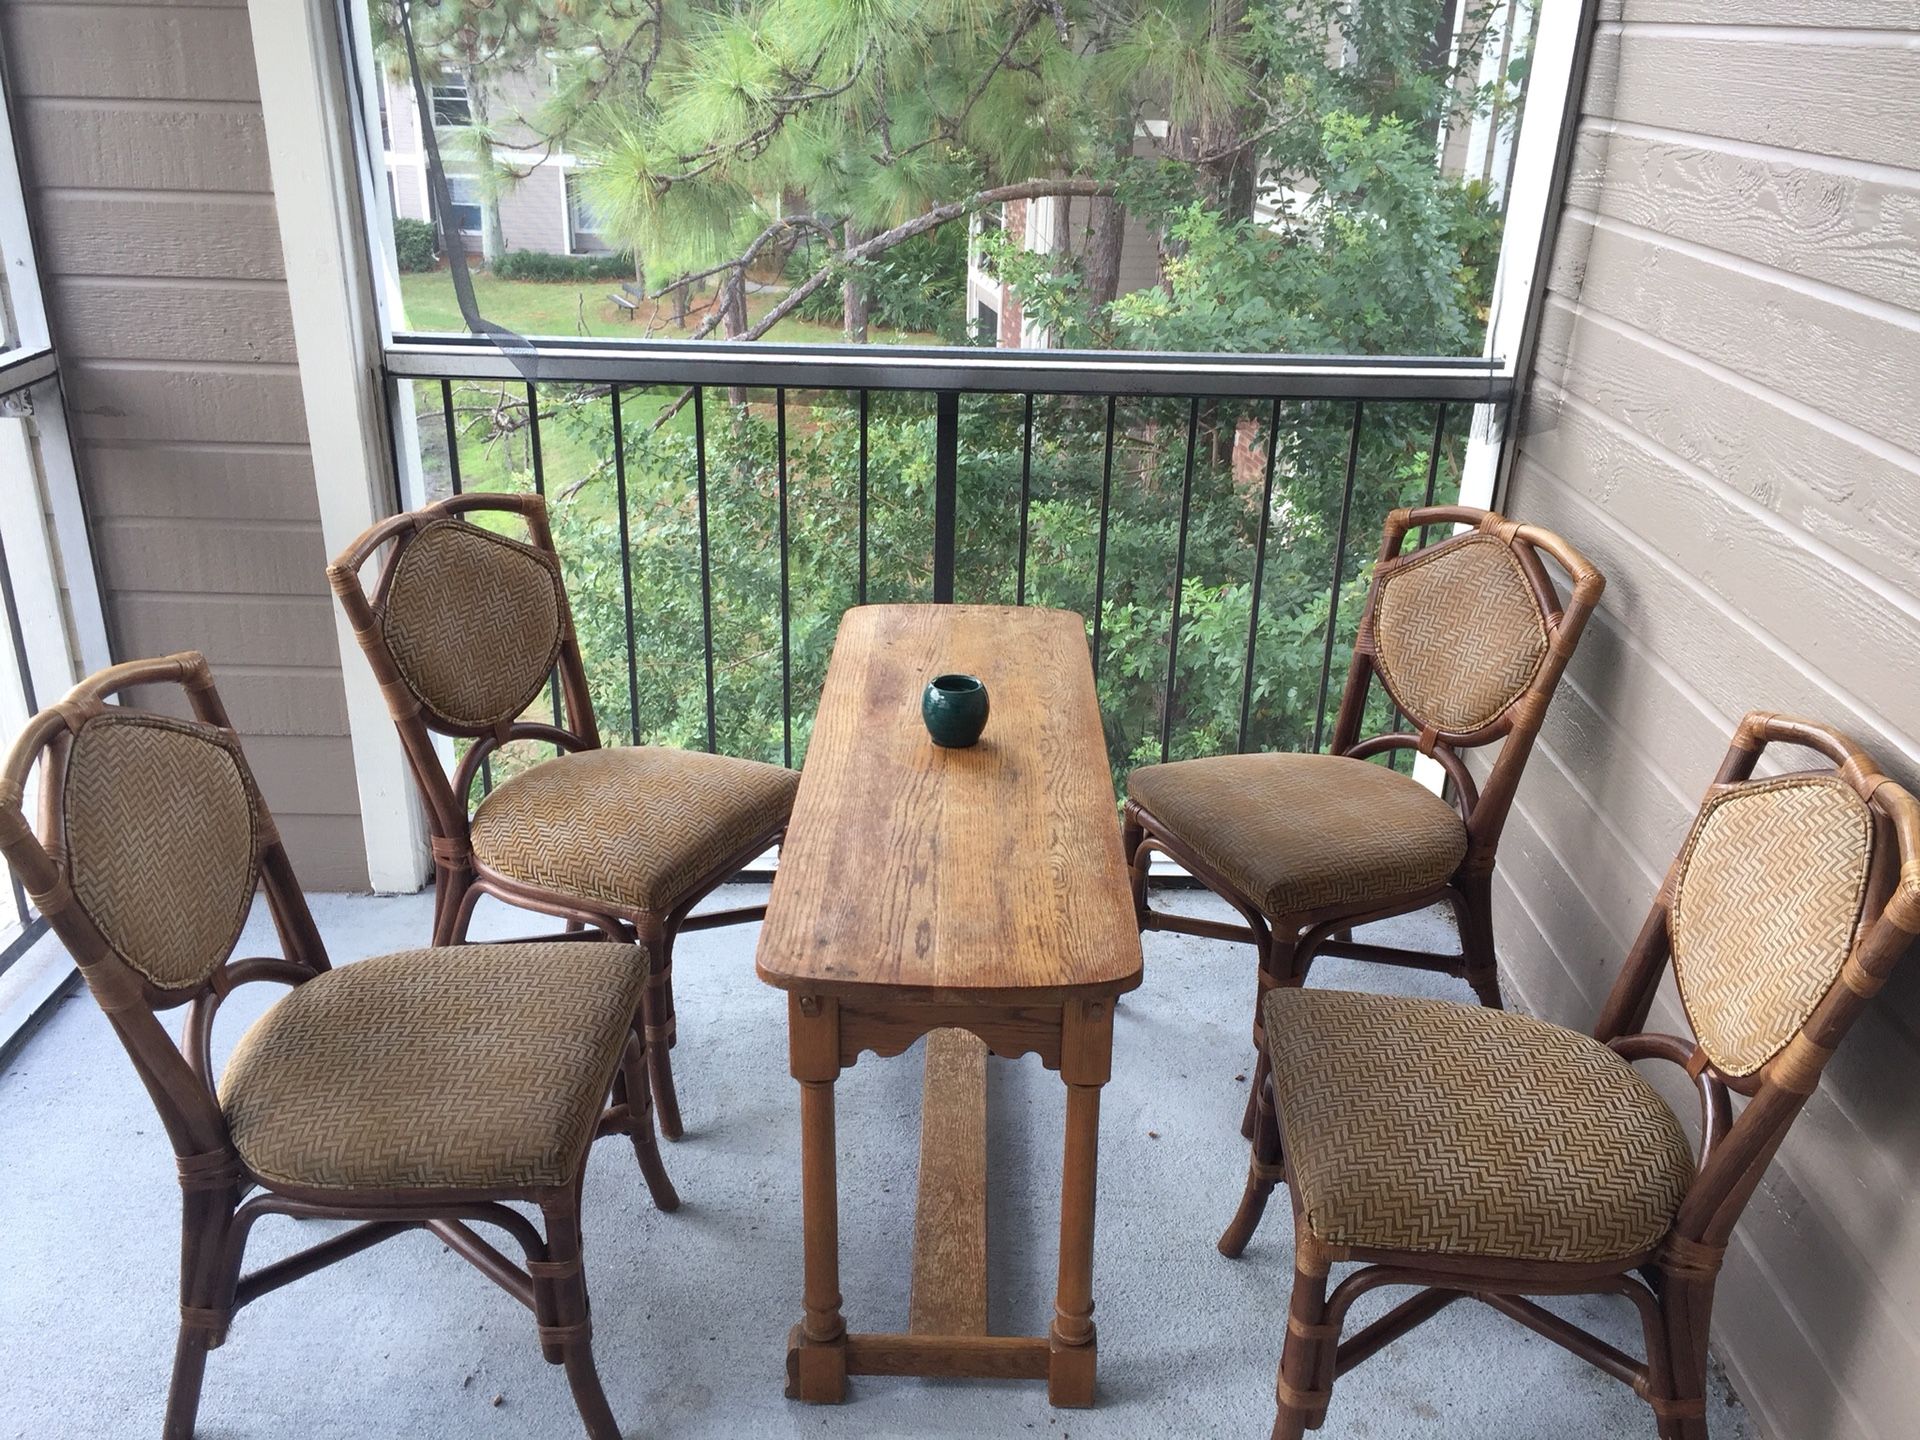 Wooden Table ($15) Four Wooden Chairs ($50) Wooden Table AND Wooden Chairs Altogether is $60